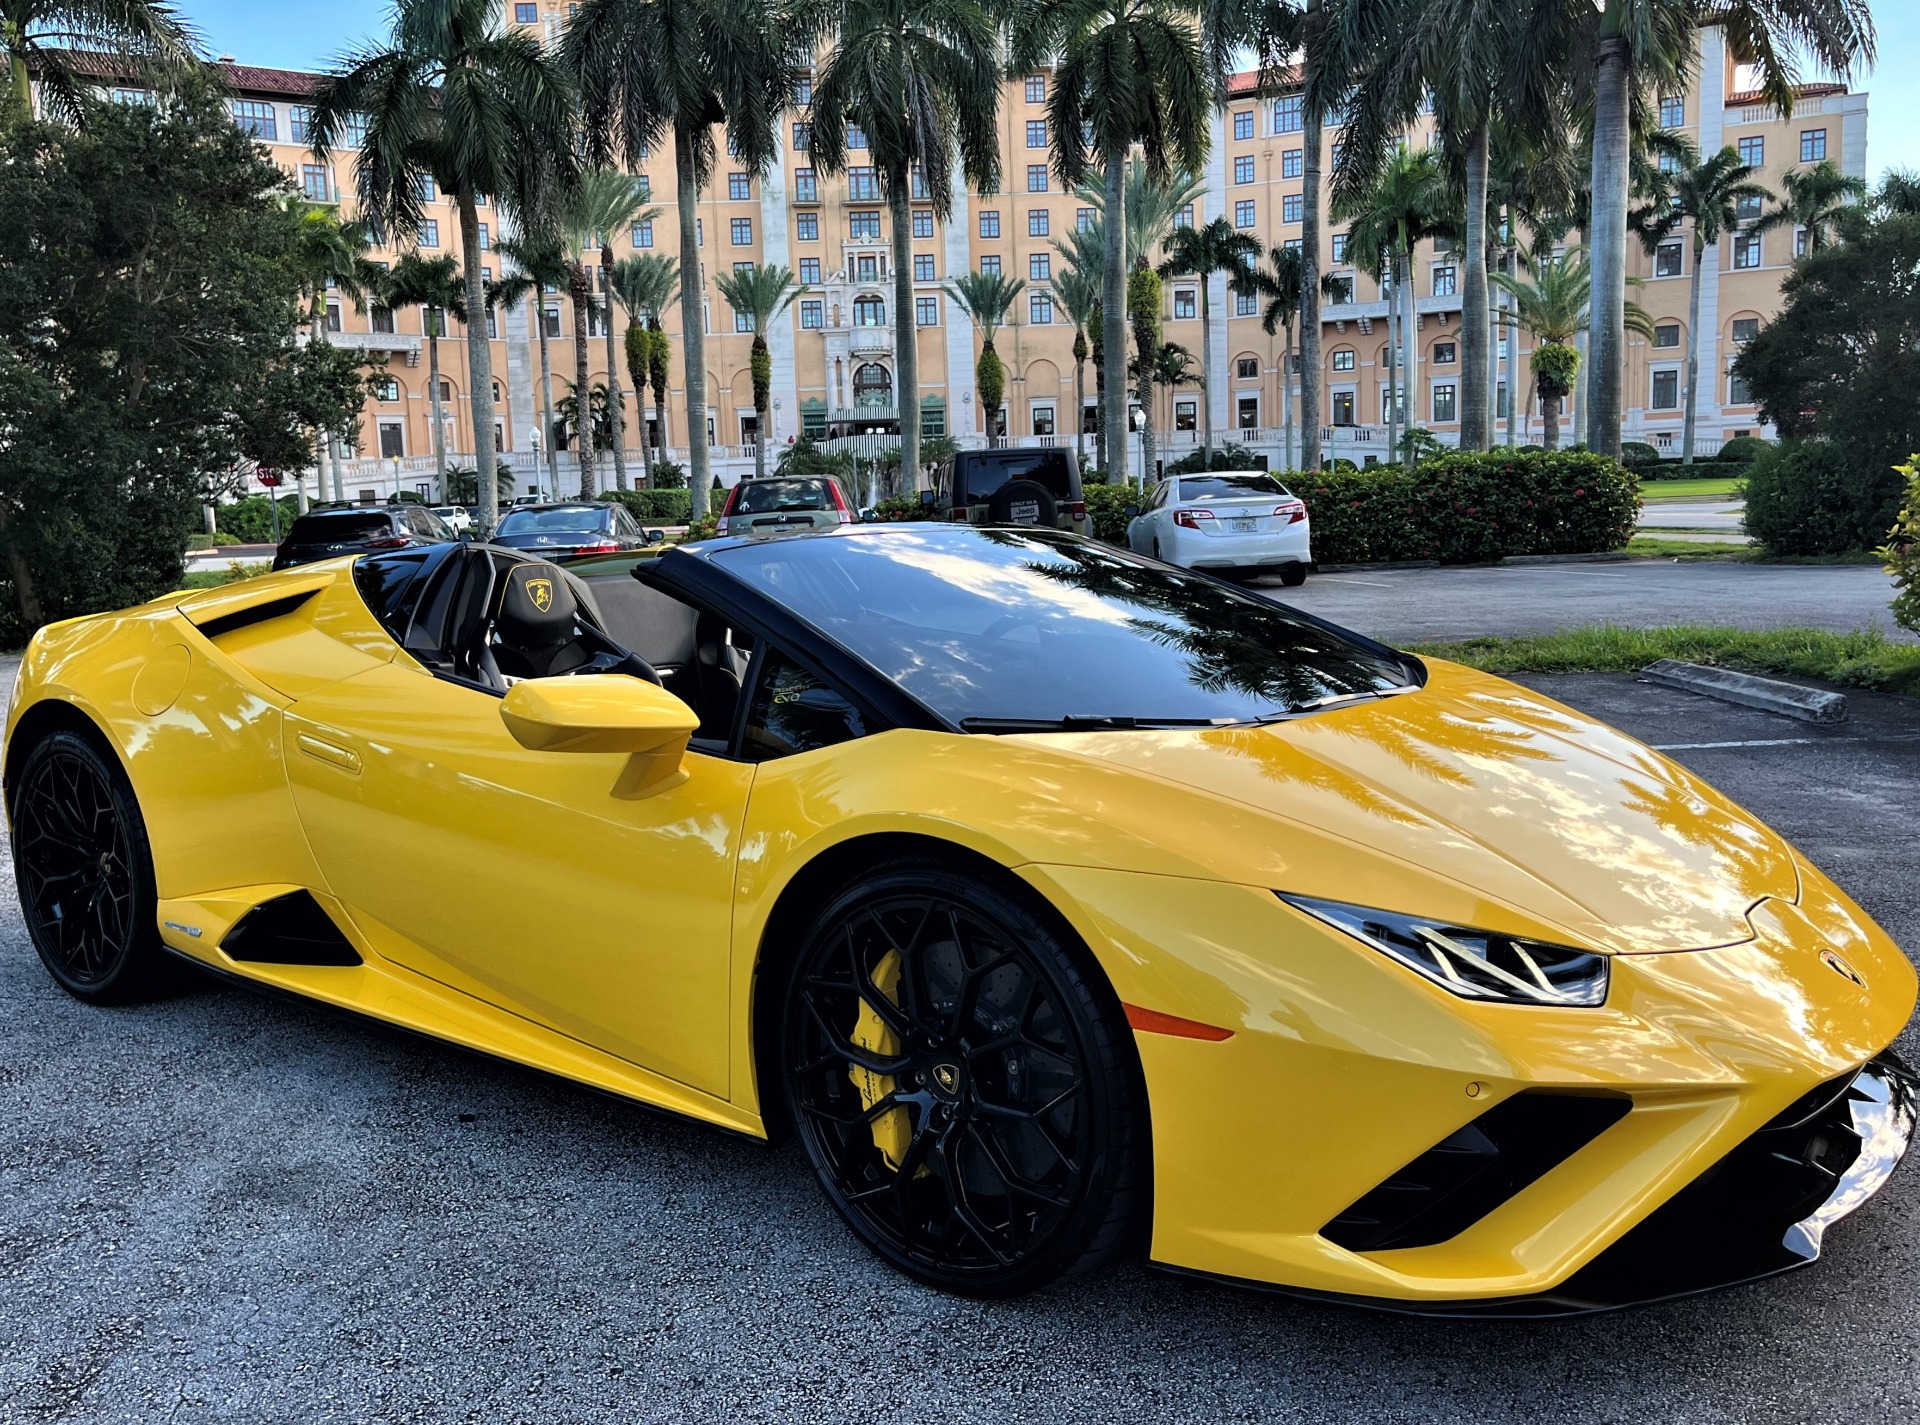 Used 2022 Lamborghini Huracan LP 610-4 EVO Spyder for sale Sold at The Gables Sports Cars in Miami FL 33146 1